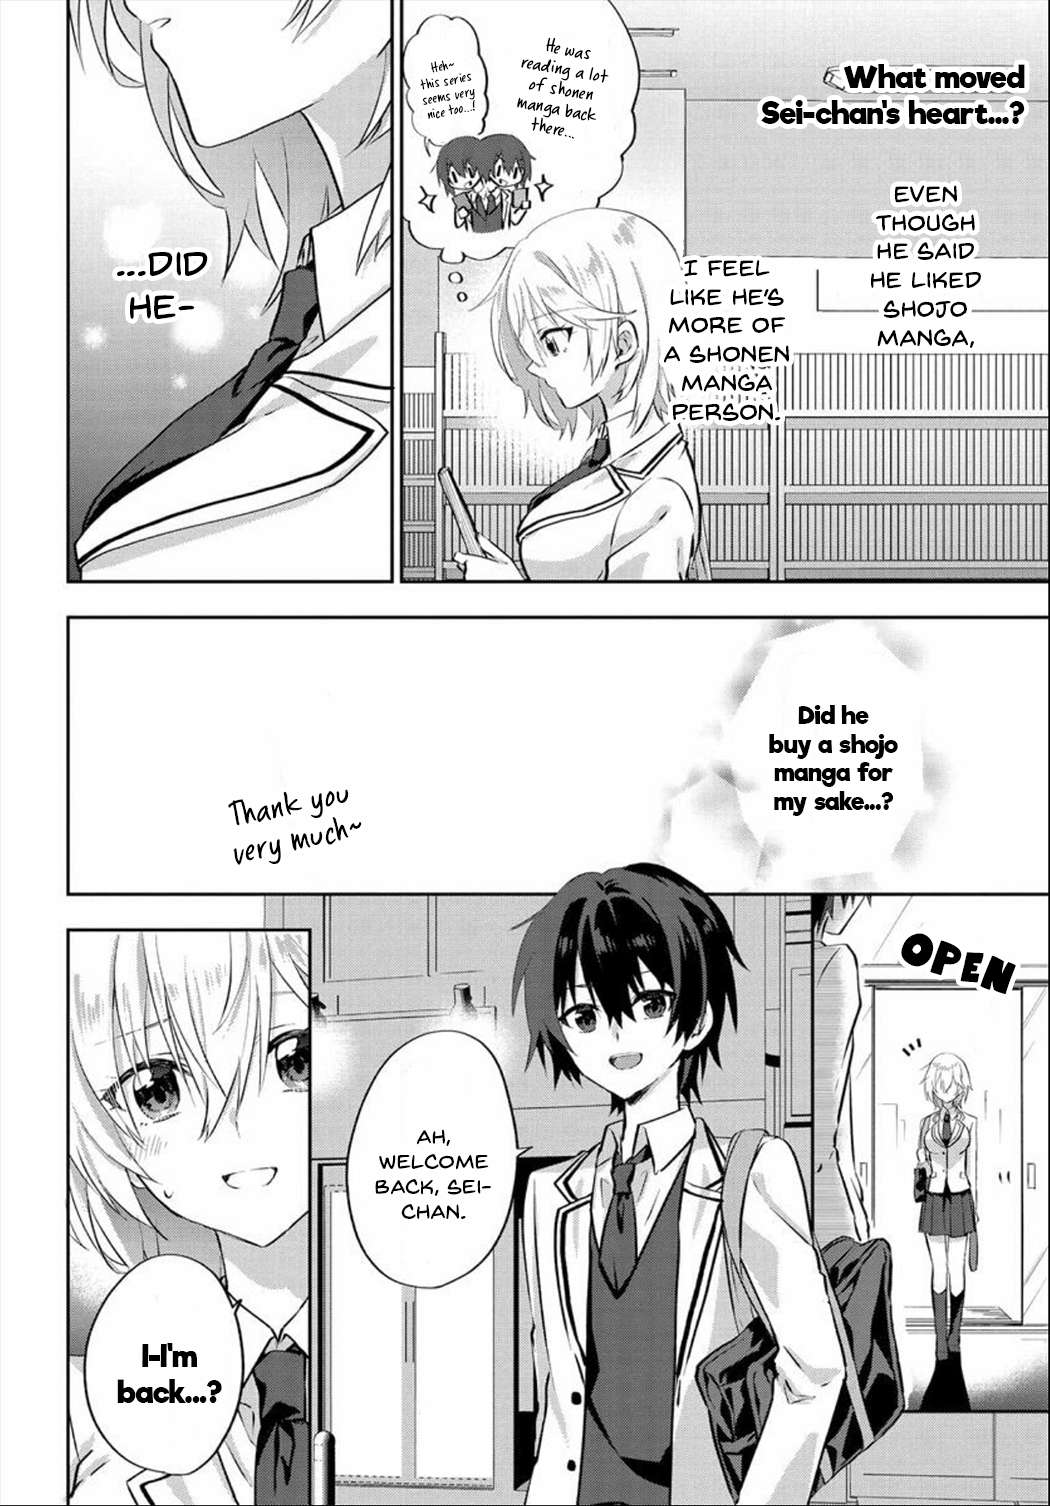 Since I’Ve Entered The World Of Romantic Comedy Manga, I’Ll Do My Best To Make The Losing Heroine Happy - chapter 5.2 - #1